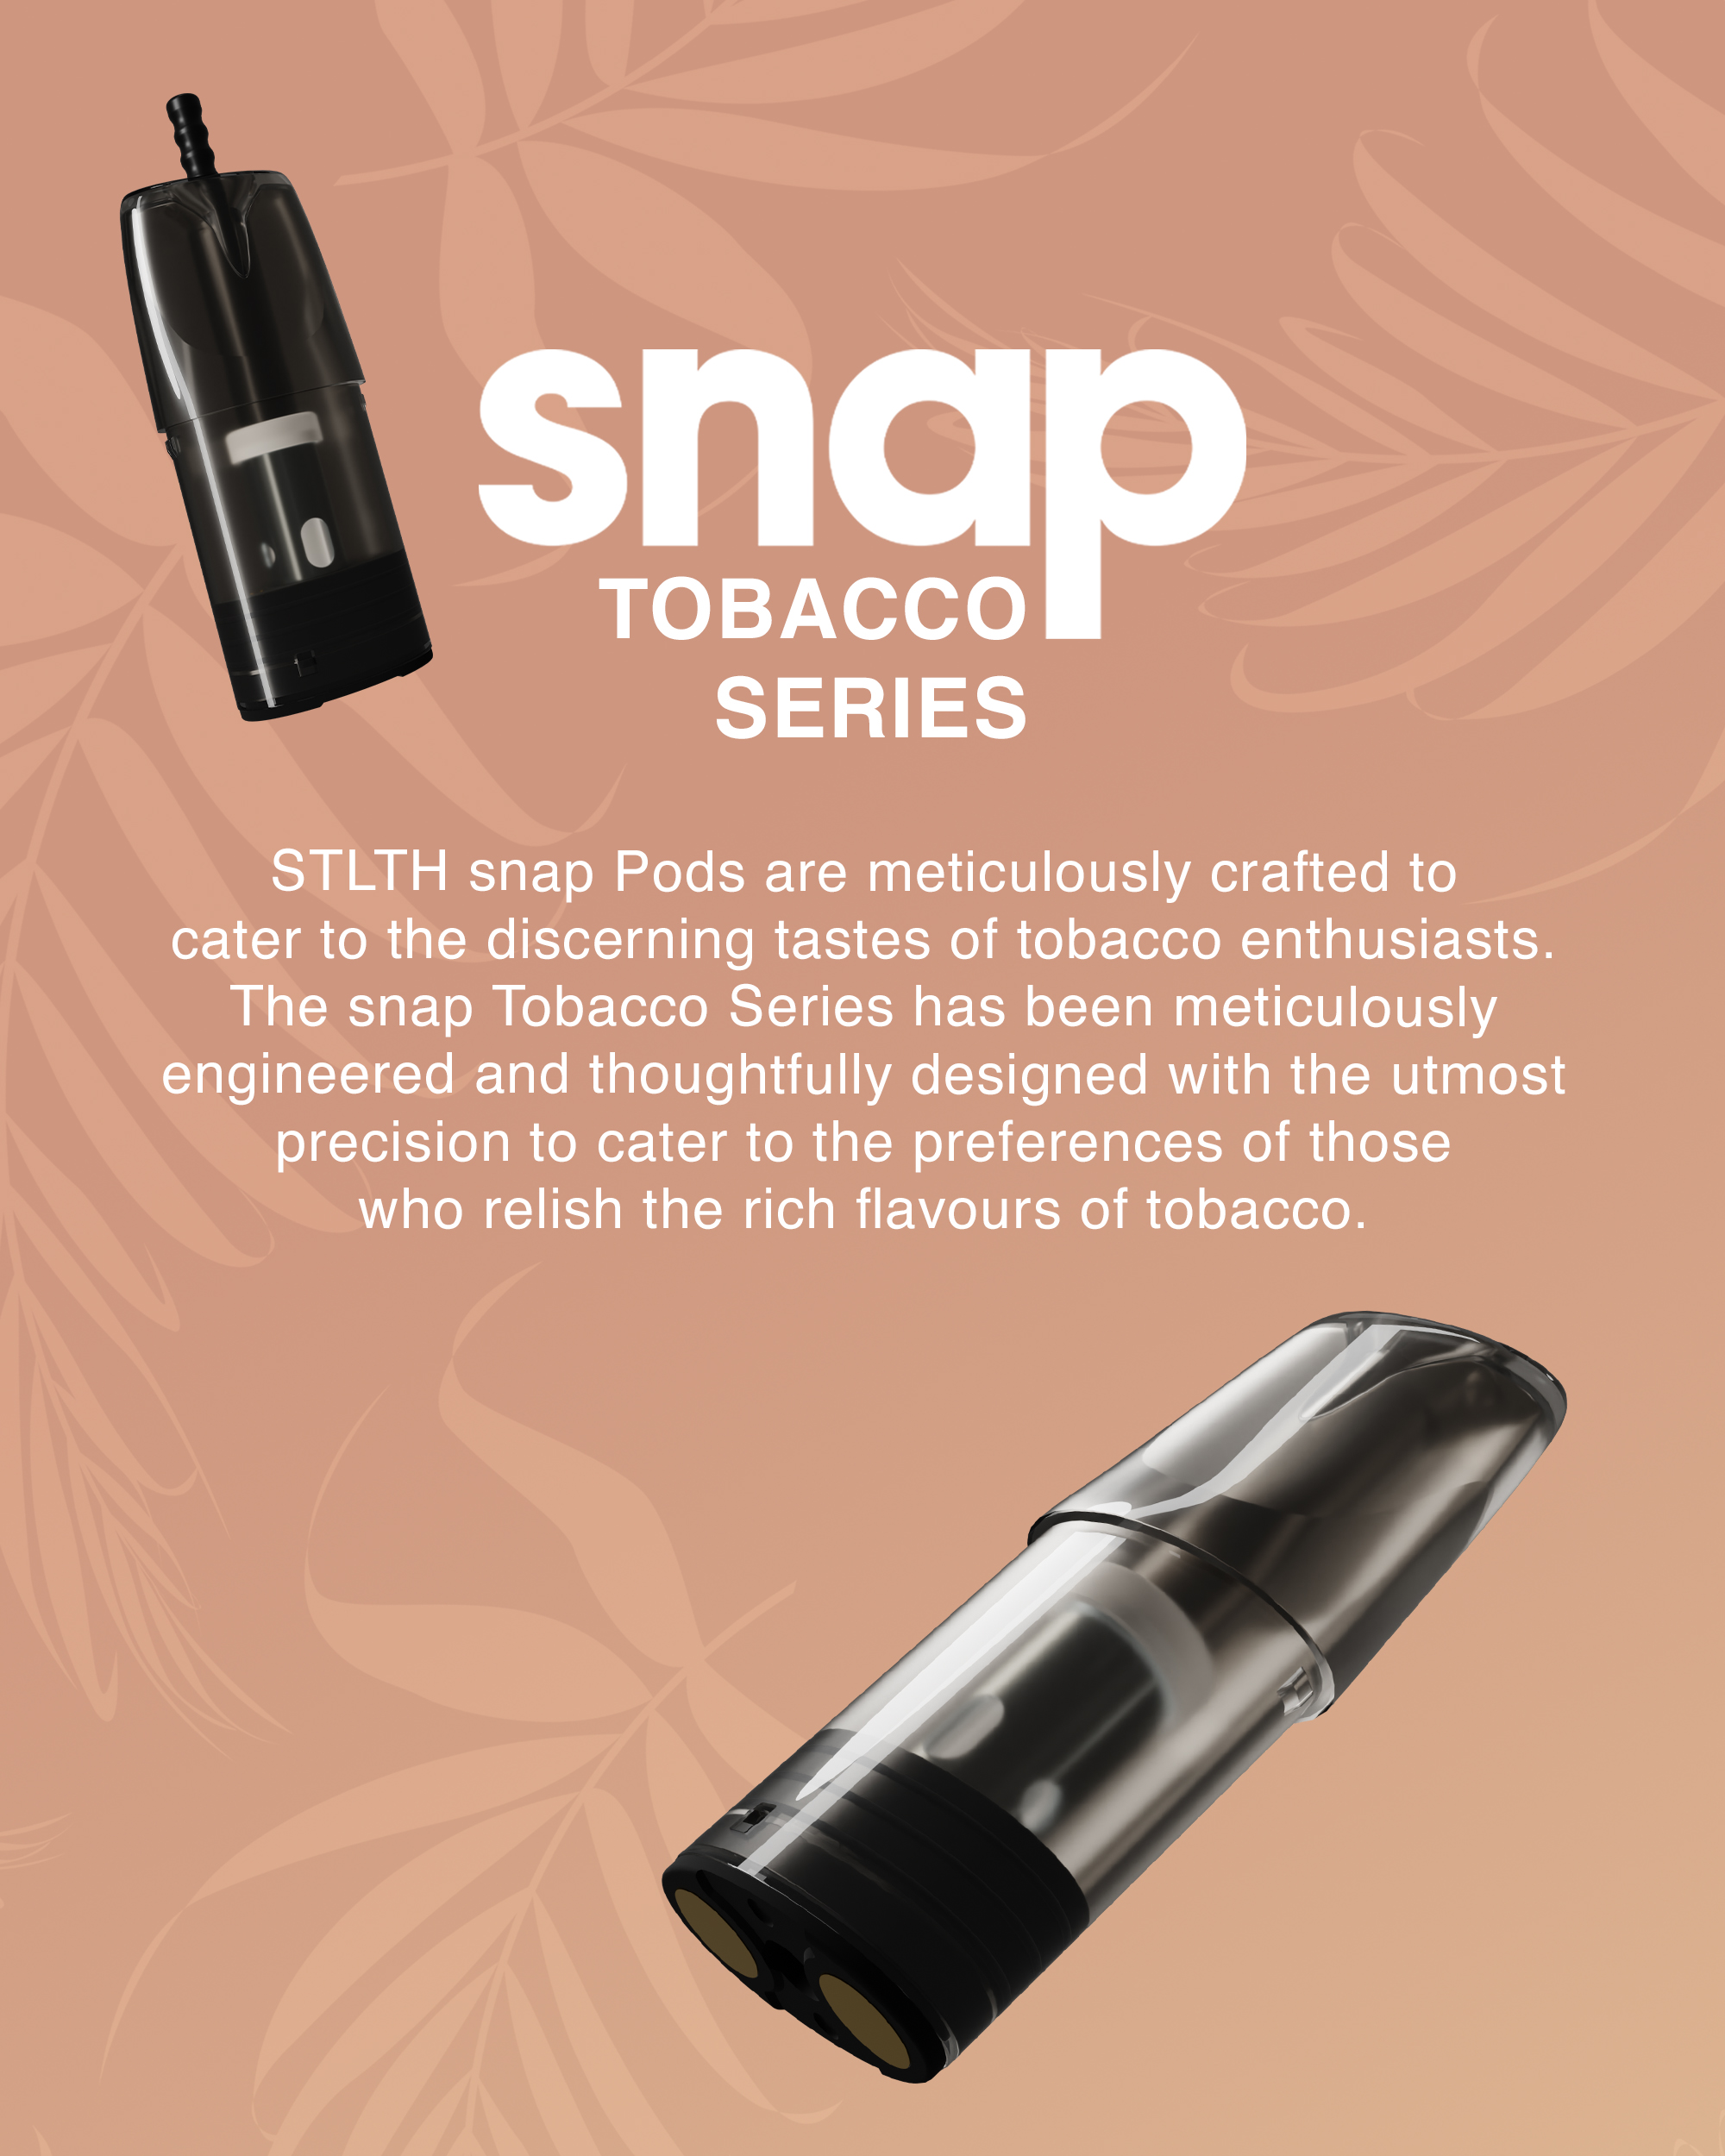 sanp TOBACCO SERIES: STLTH snp Pods are meticulously crafted to cater to the discerning tastes of tobacco enthusiasts. The sanp Tobacco Series has been meticulously engineered and thoughtfully designed with the utmost precision to cater to the preferences of those who relish the rich flavours of tobacco.